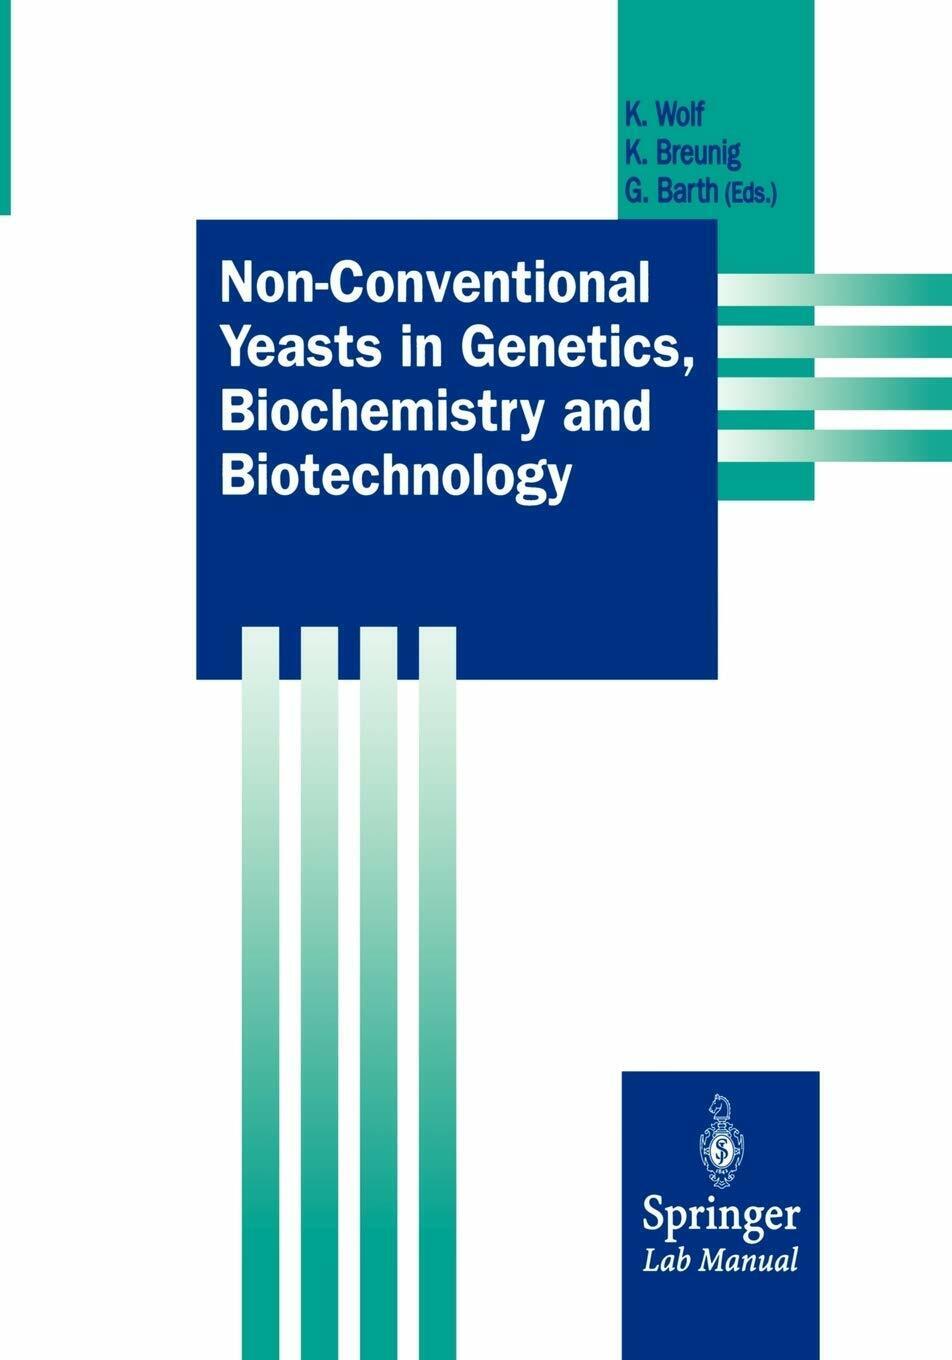 Non-Conventional Yeasts in Genetics, Biochemistry and Biotechnology - 2003